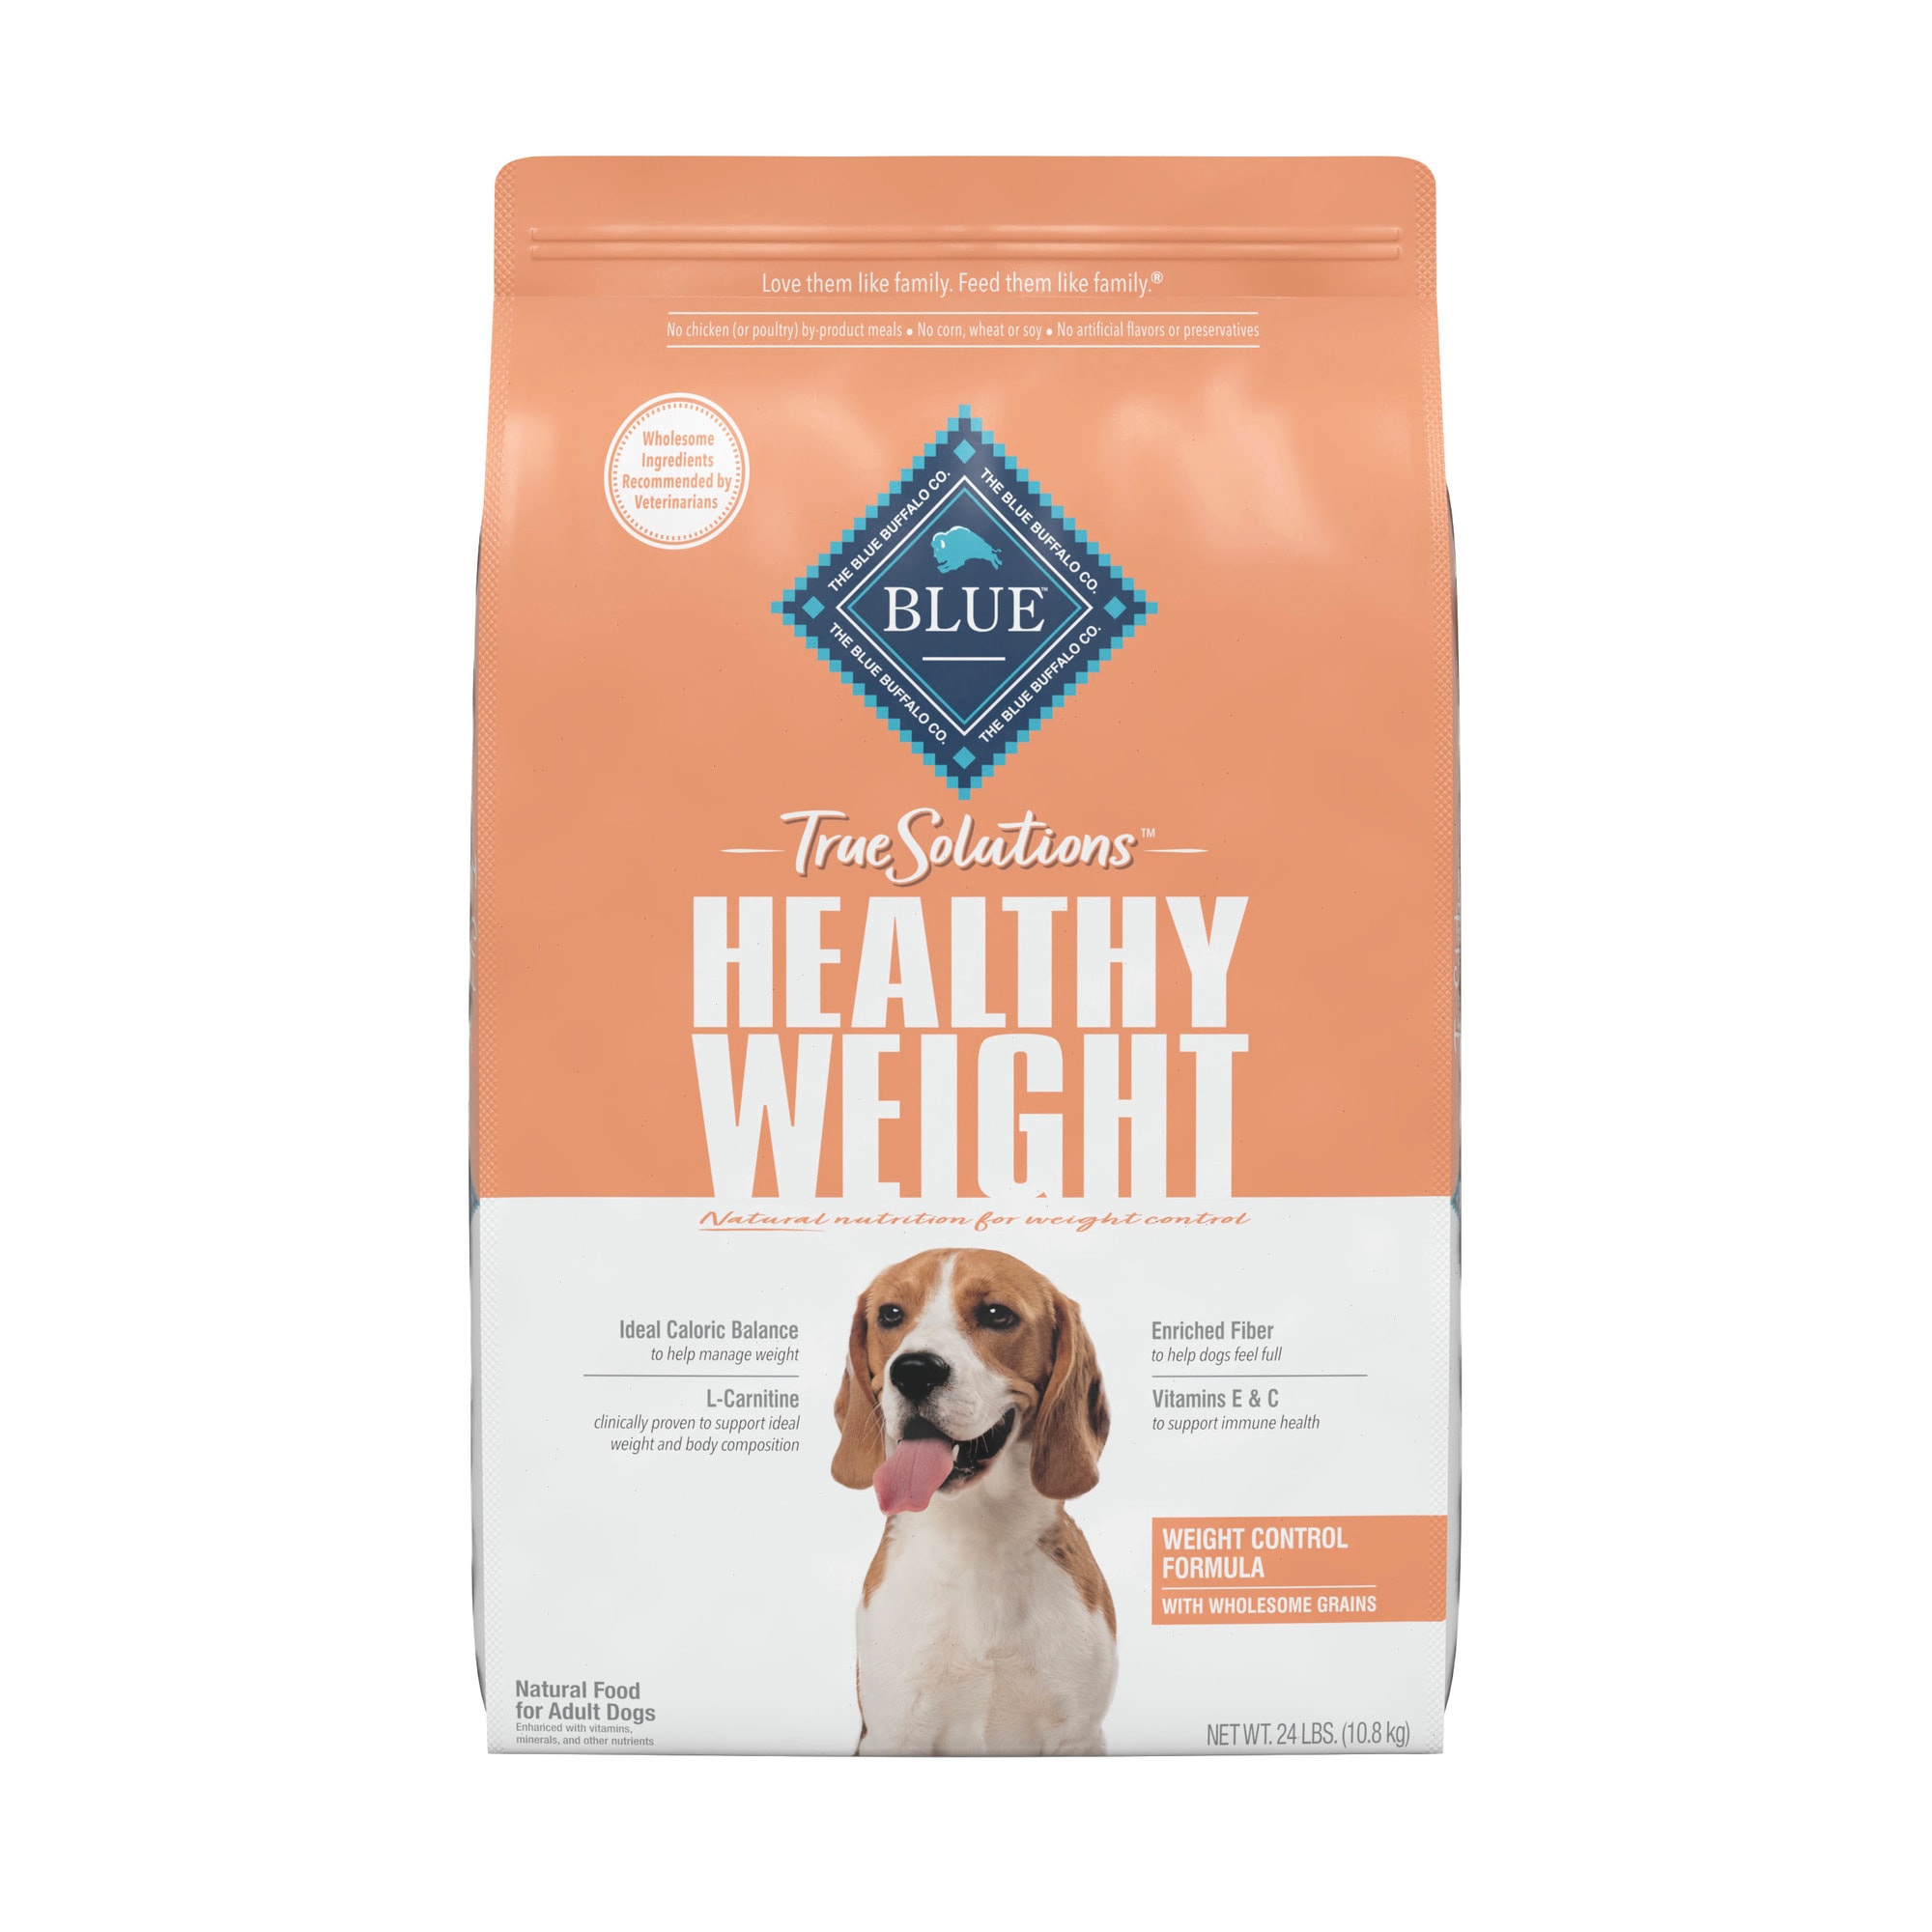 healthy dog food for small dogs